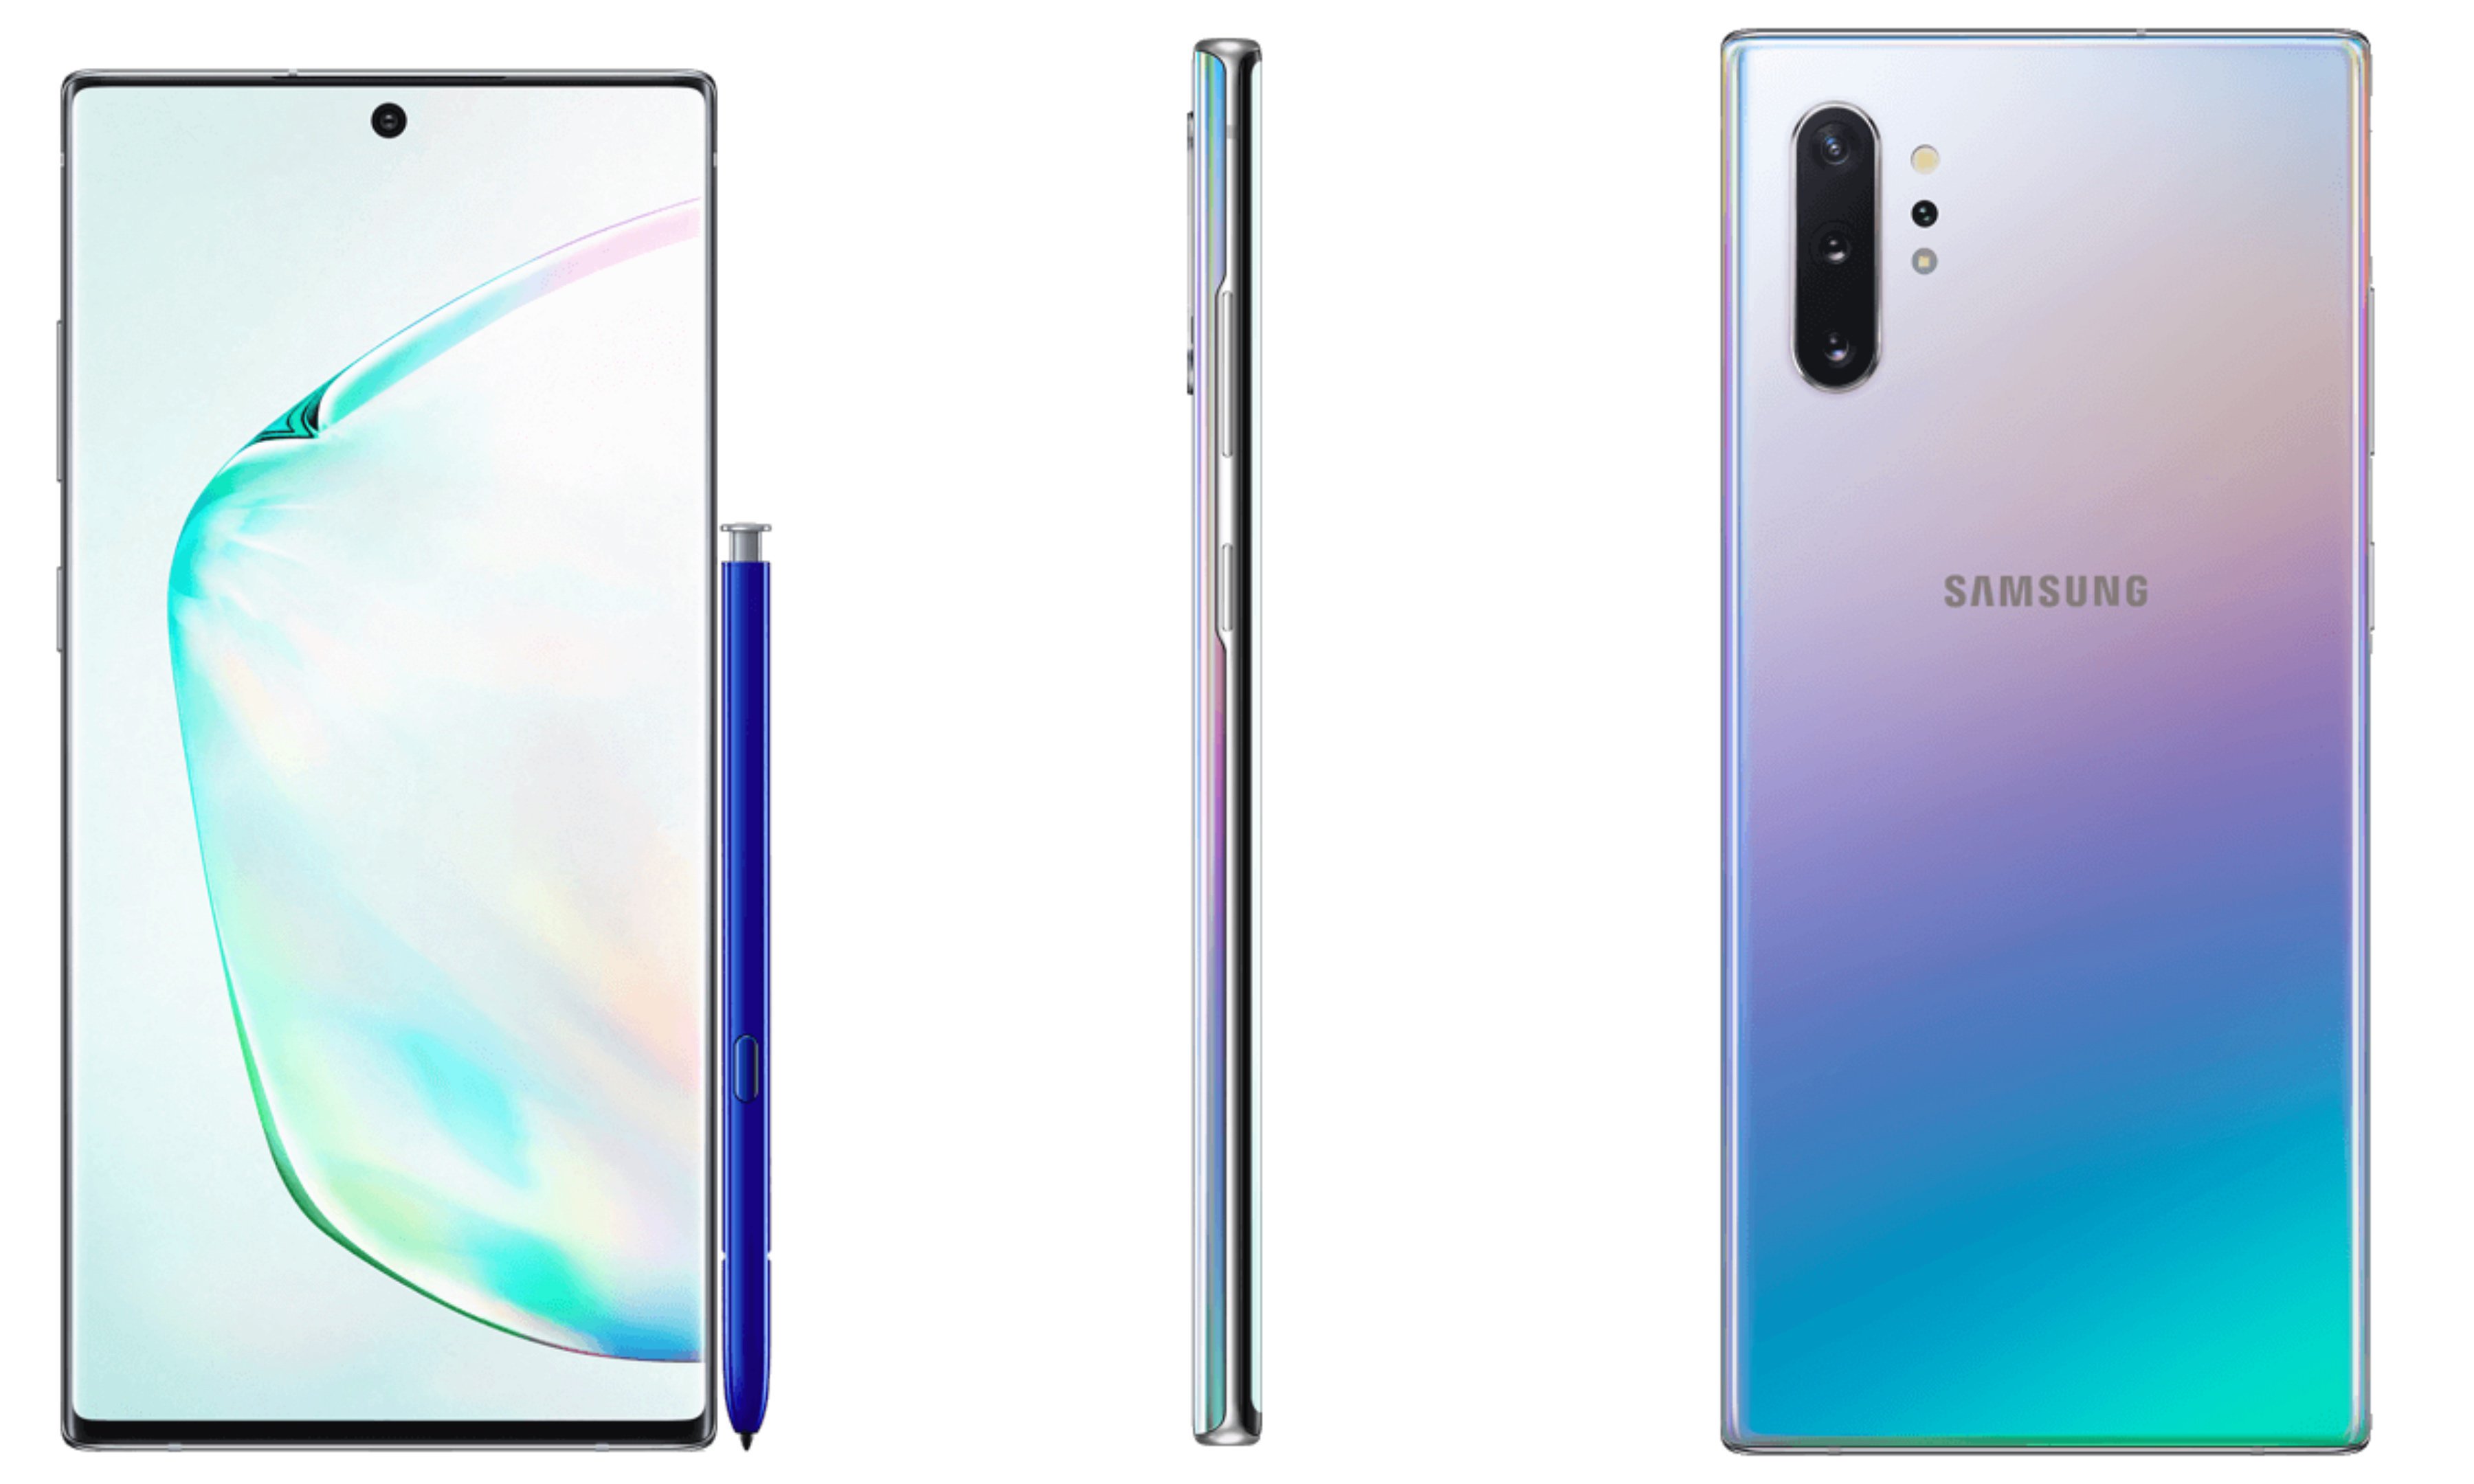 New leak reveal full specifications of Galaxy Note 10 and Note 10+